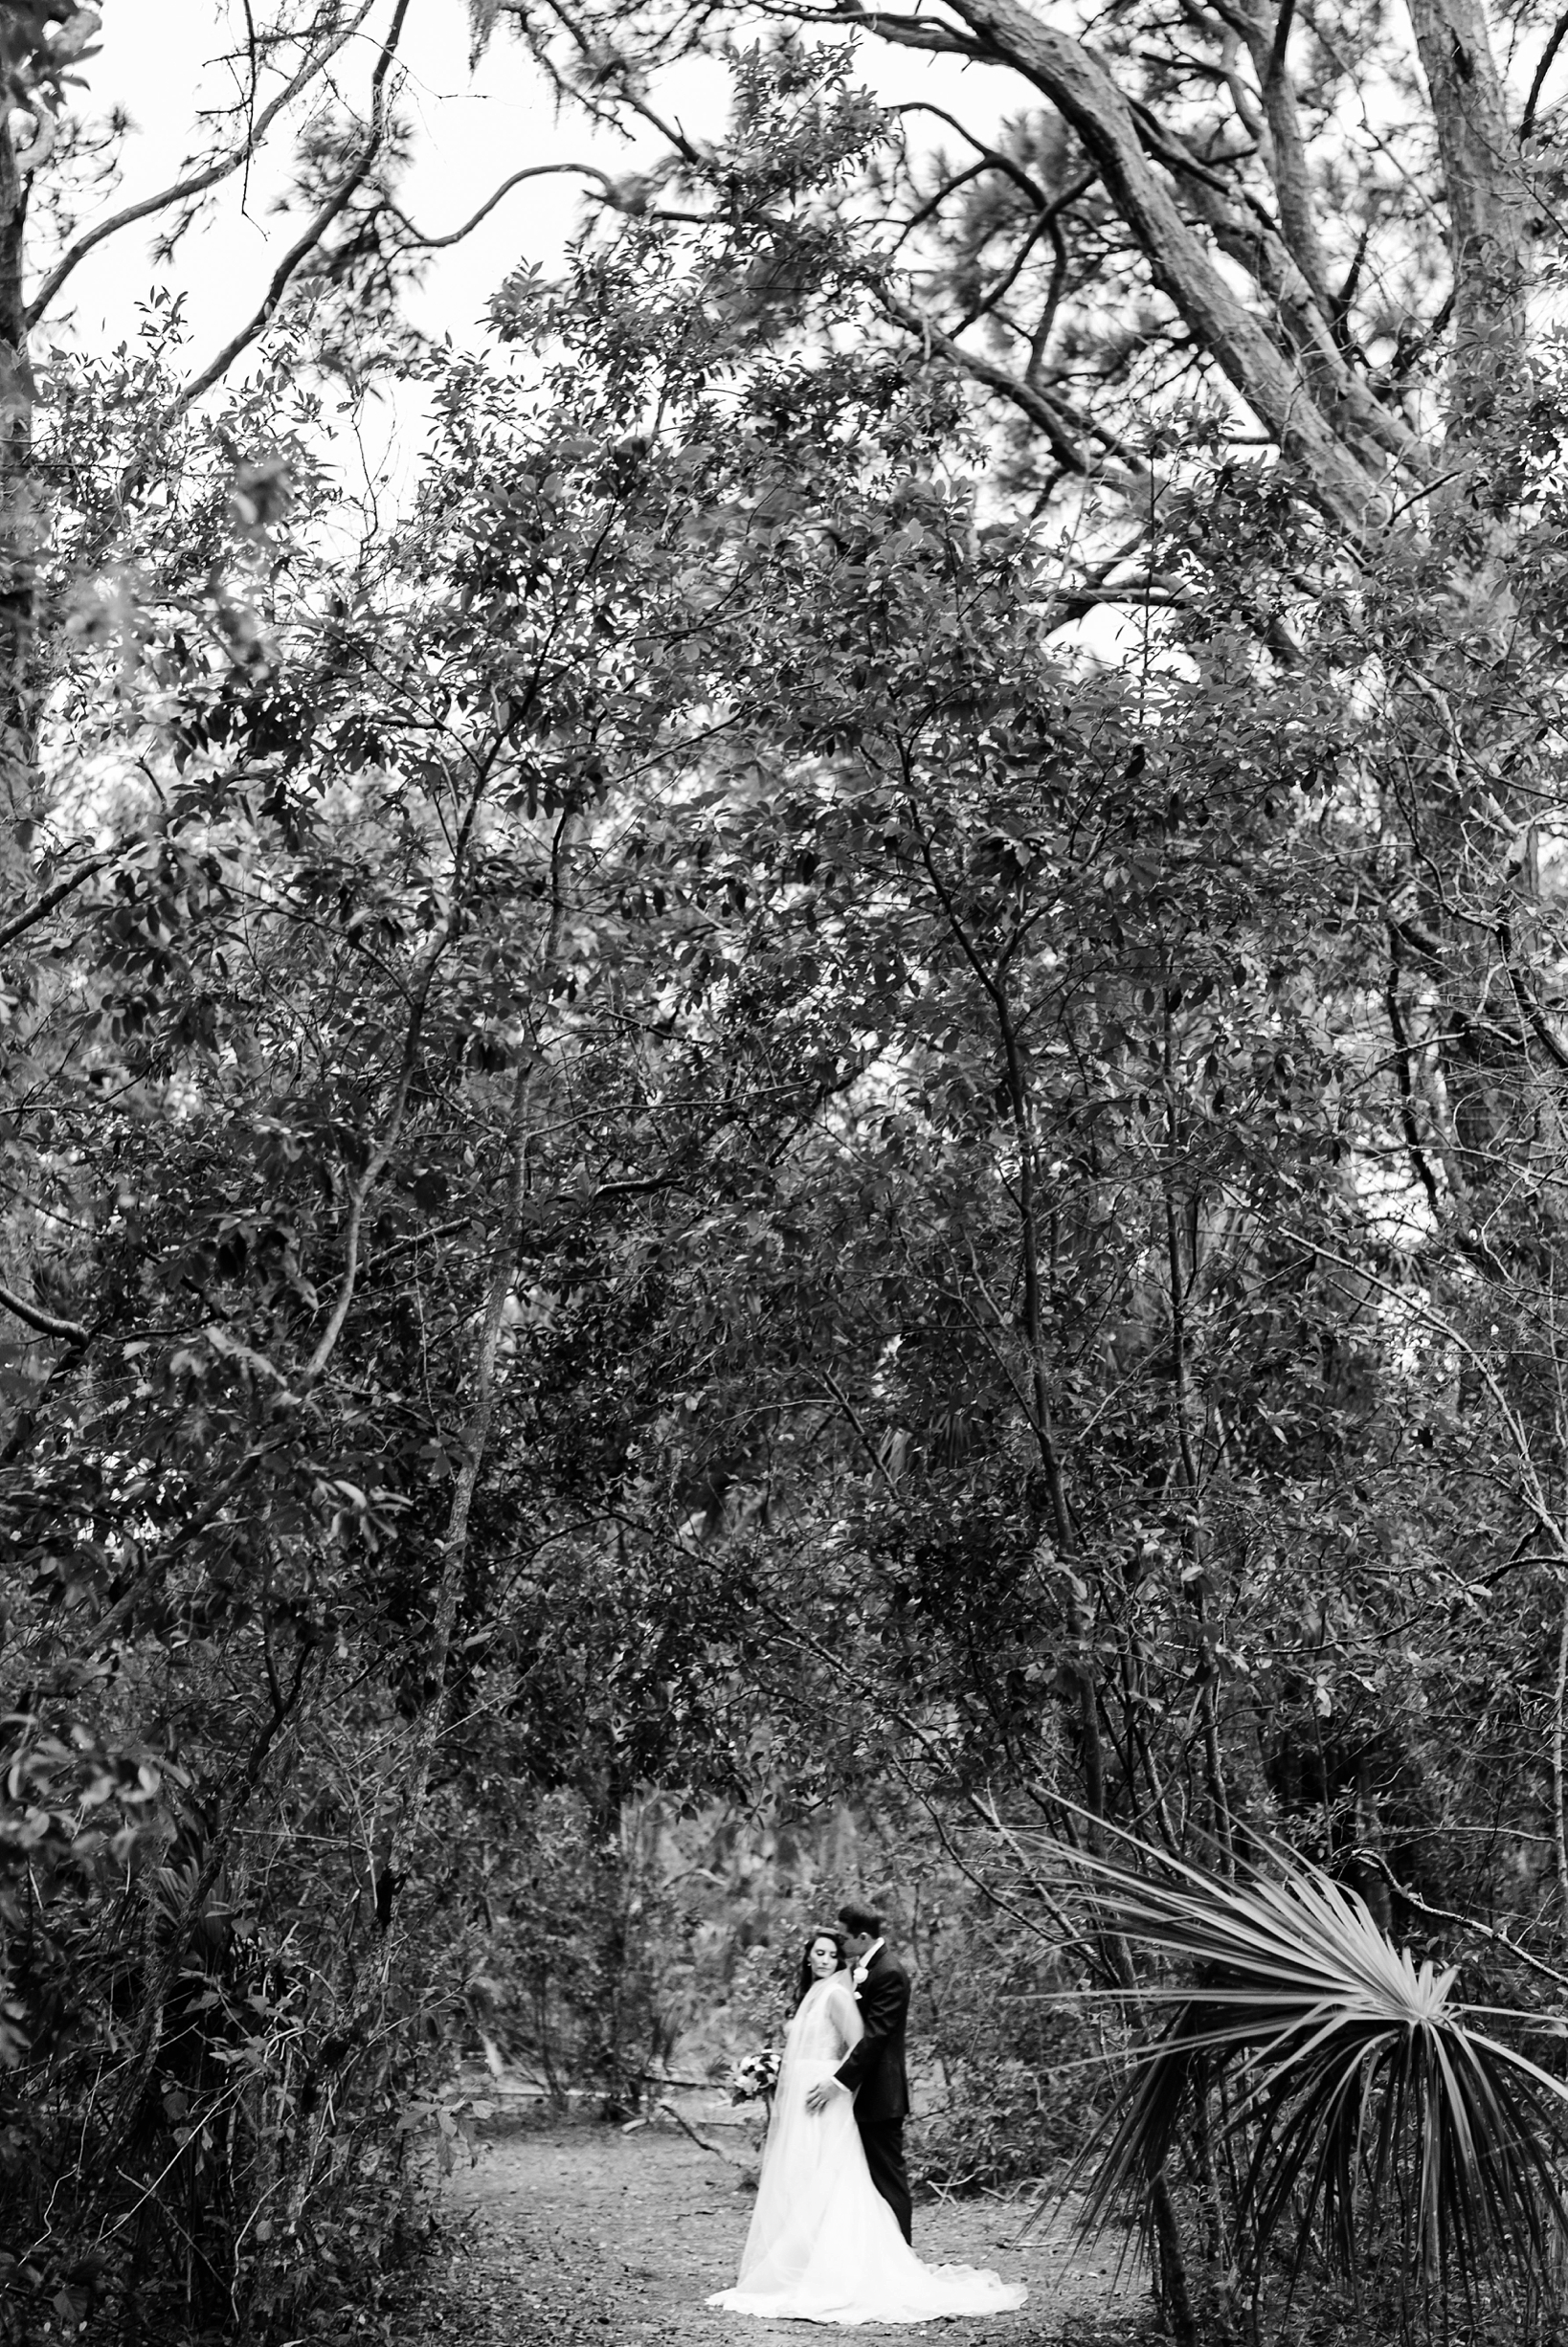 A stunning black and white photo of a bride and groom nearly engulfed in Florida trees and palms by Sarah & Ben Photography. Check out all our work at www.sarahben.com